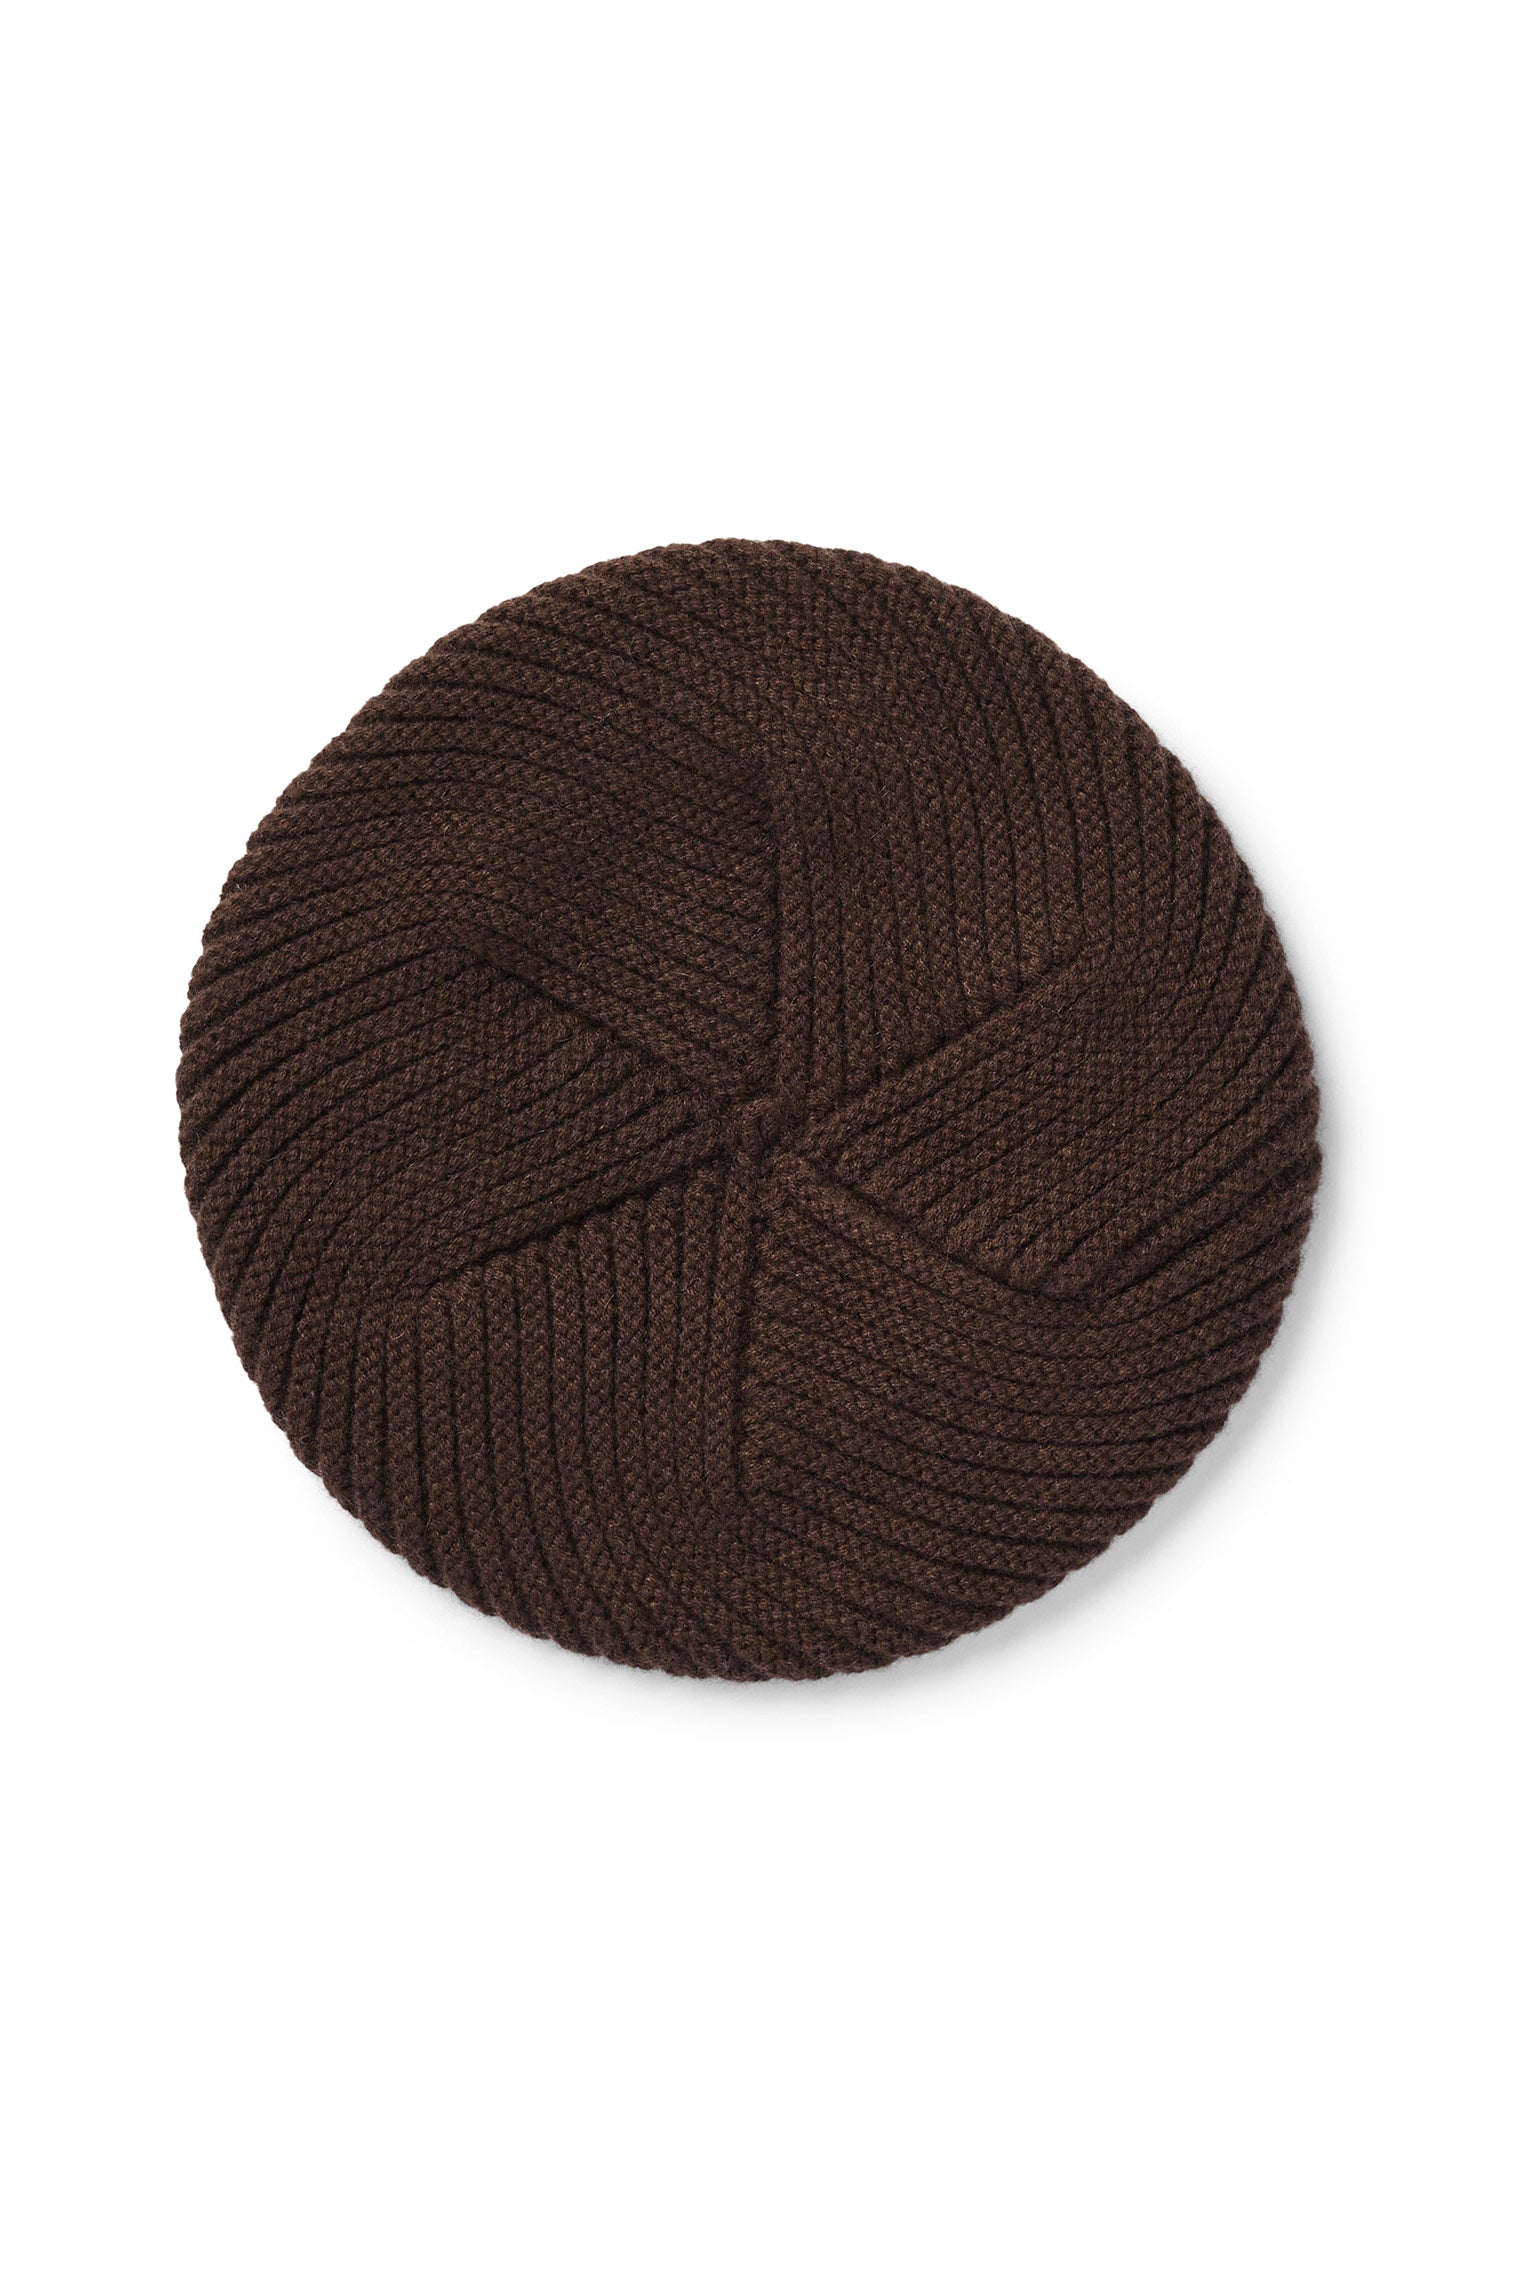 Brown Knitted Cashmere Beret - Women's Berets - Lock & Co. Hatters London UK